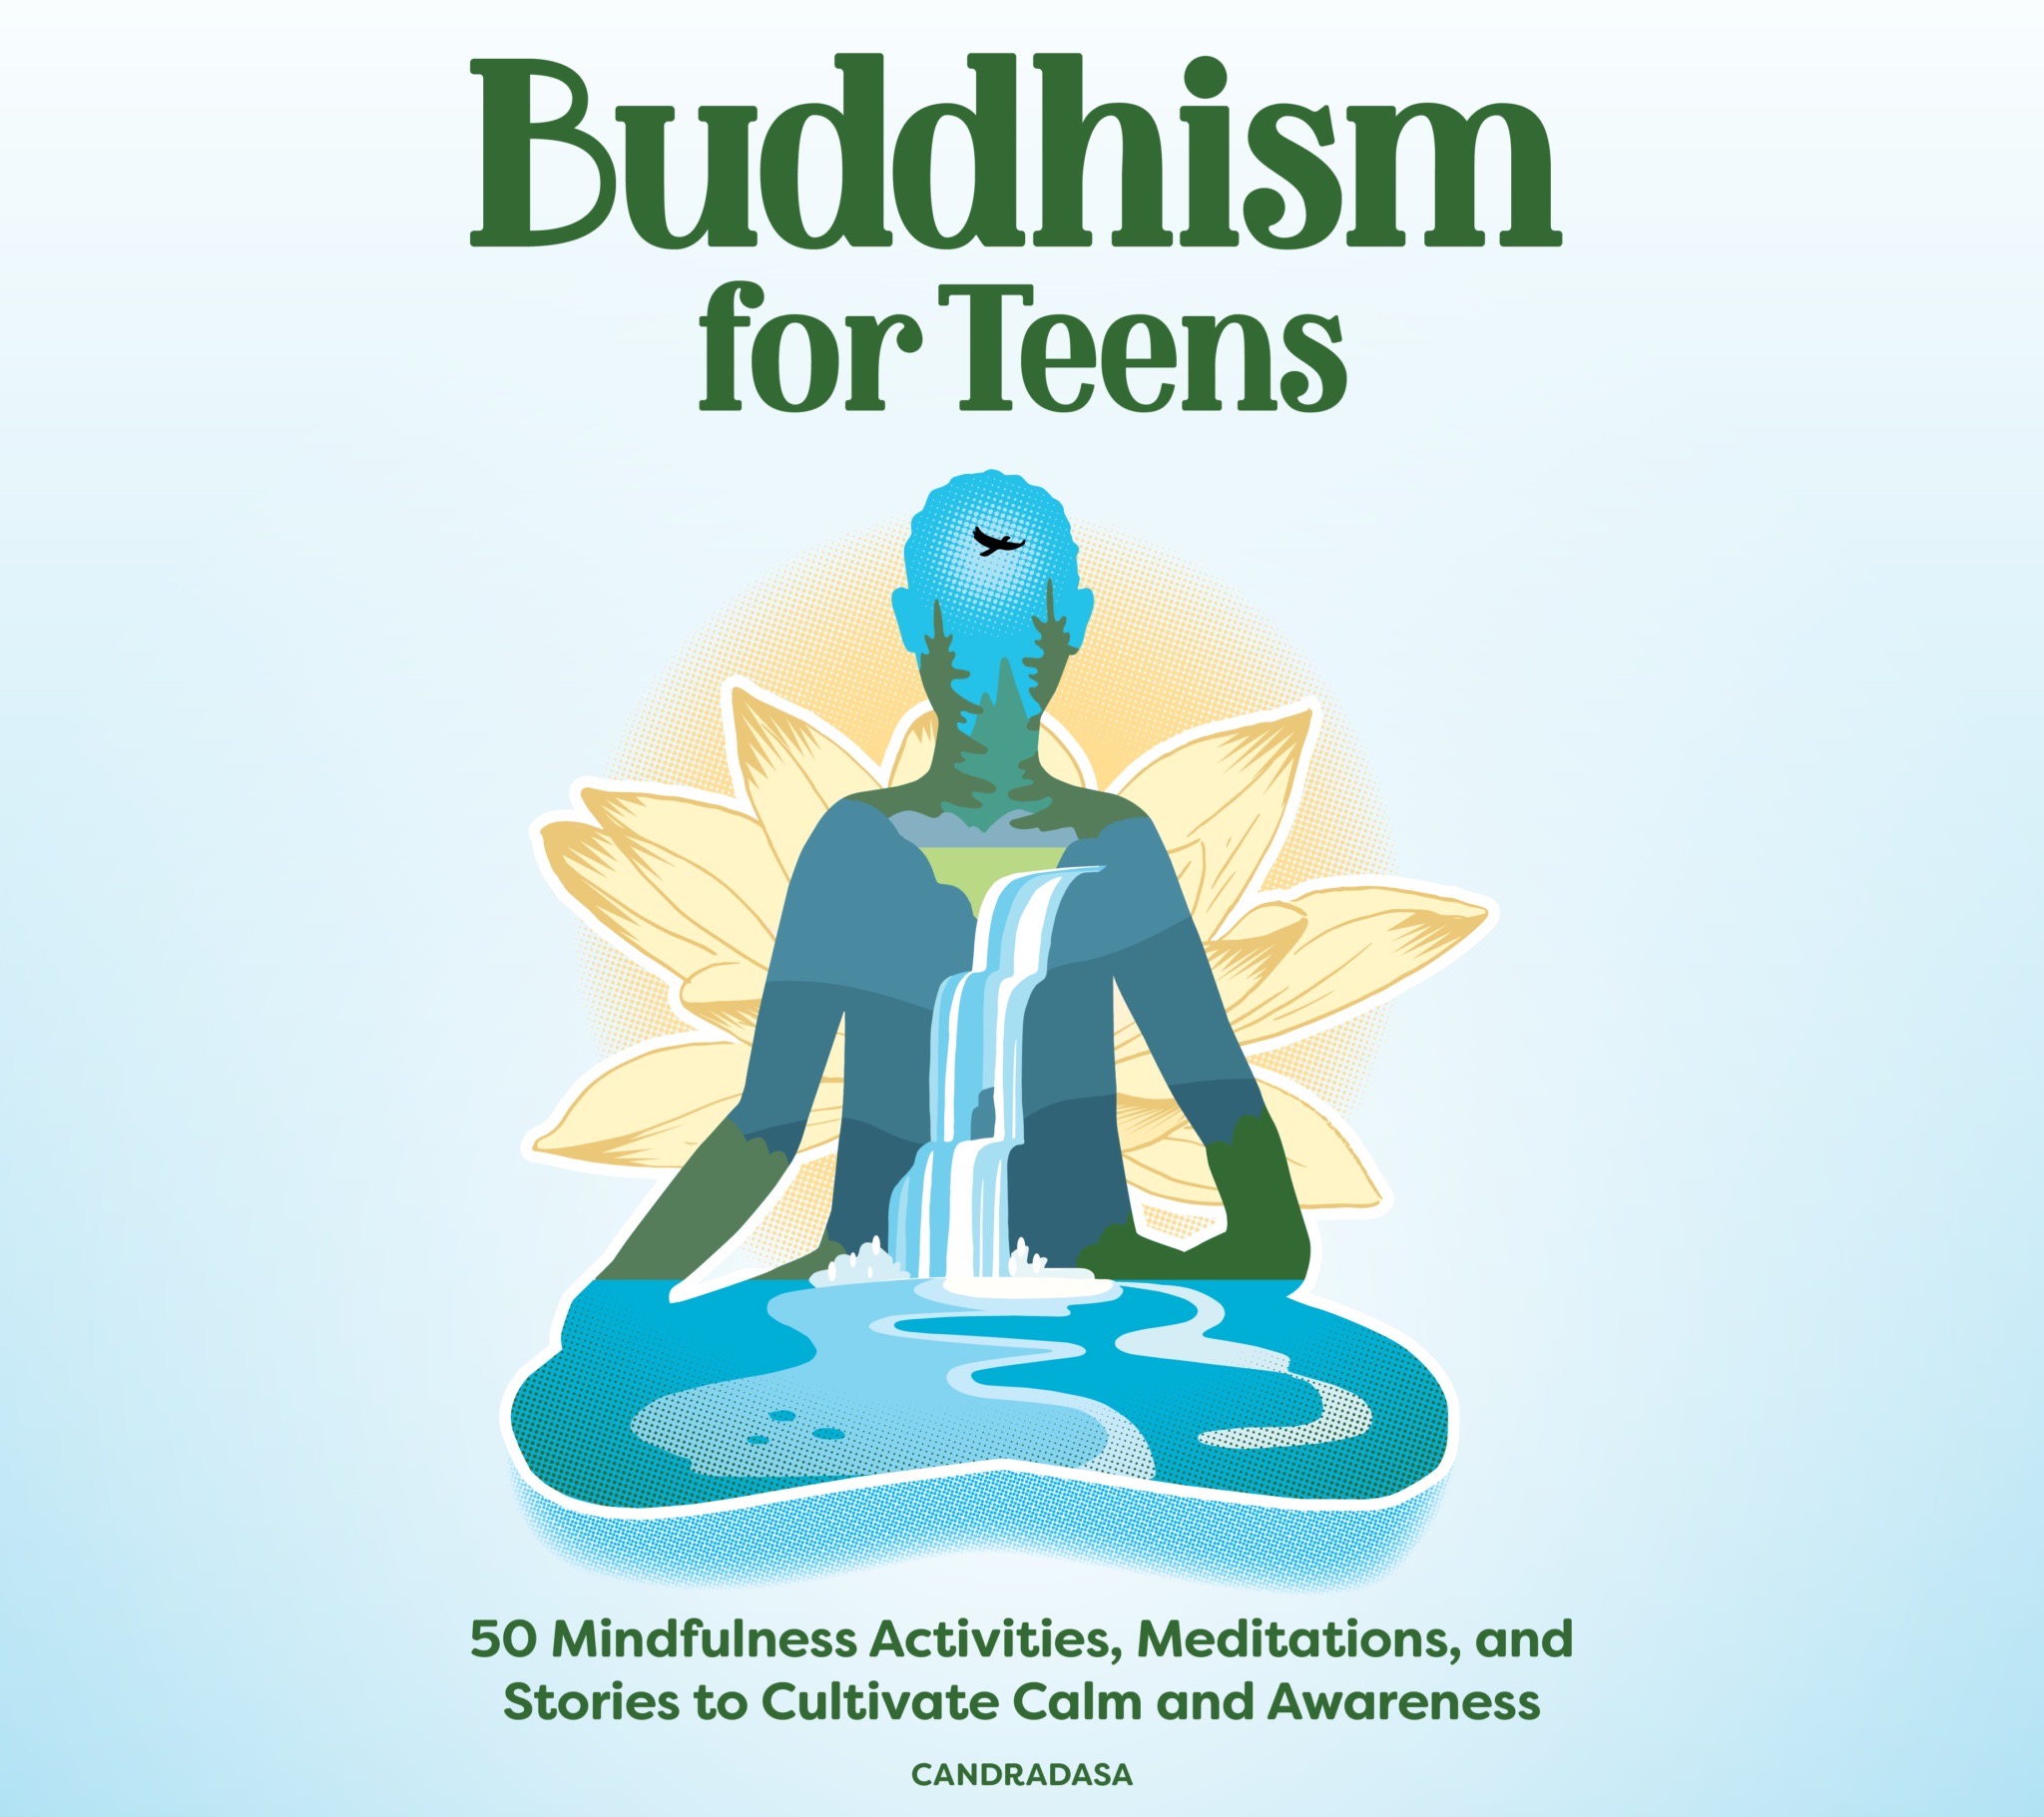 Dhawunirodha Buddhism For Teens (The Buddhist Centre Podcast, Episode 424)